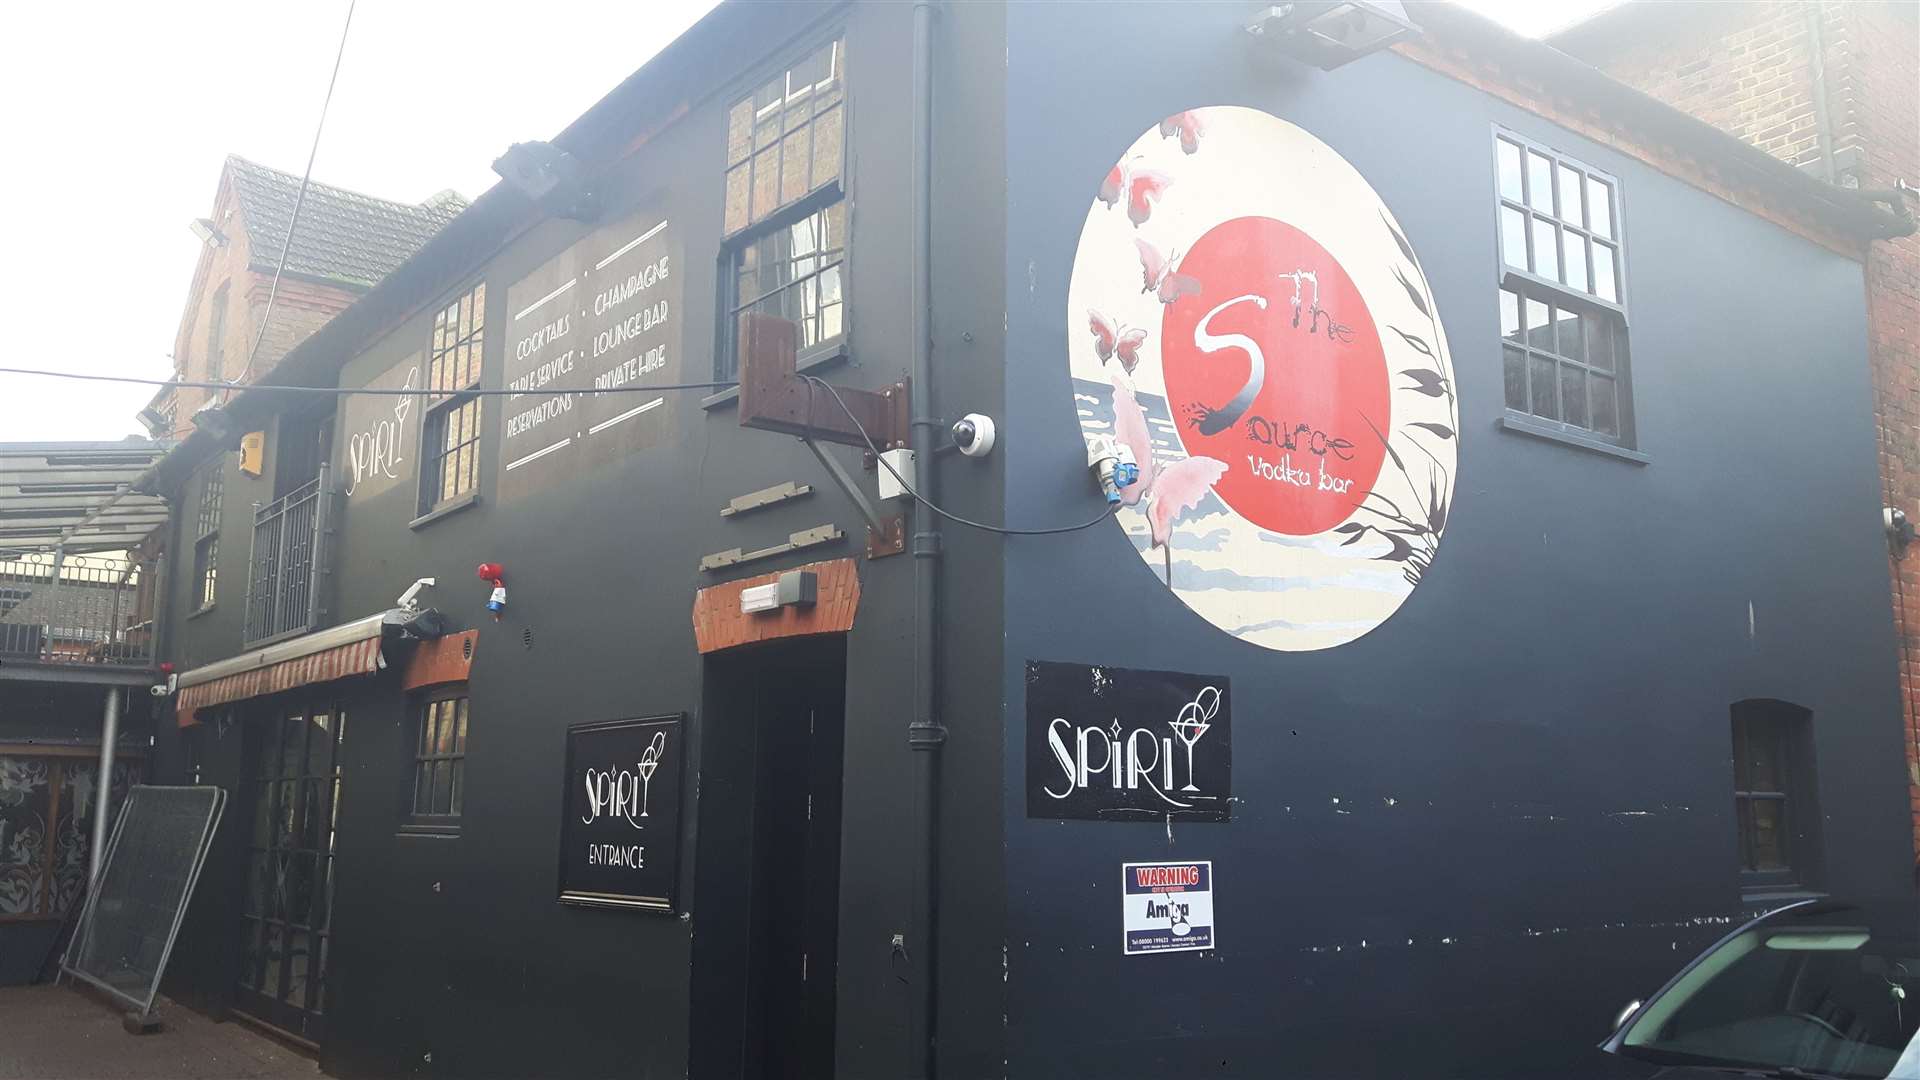 The young woman was on a night out and says she started feeling strange after a man bought her a drink at the Source Bar in Maidstone